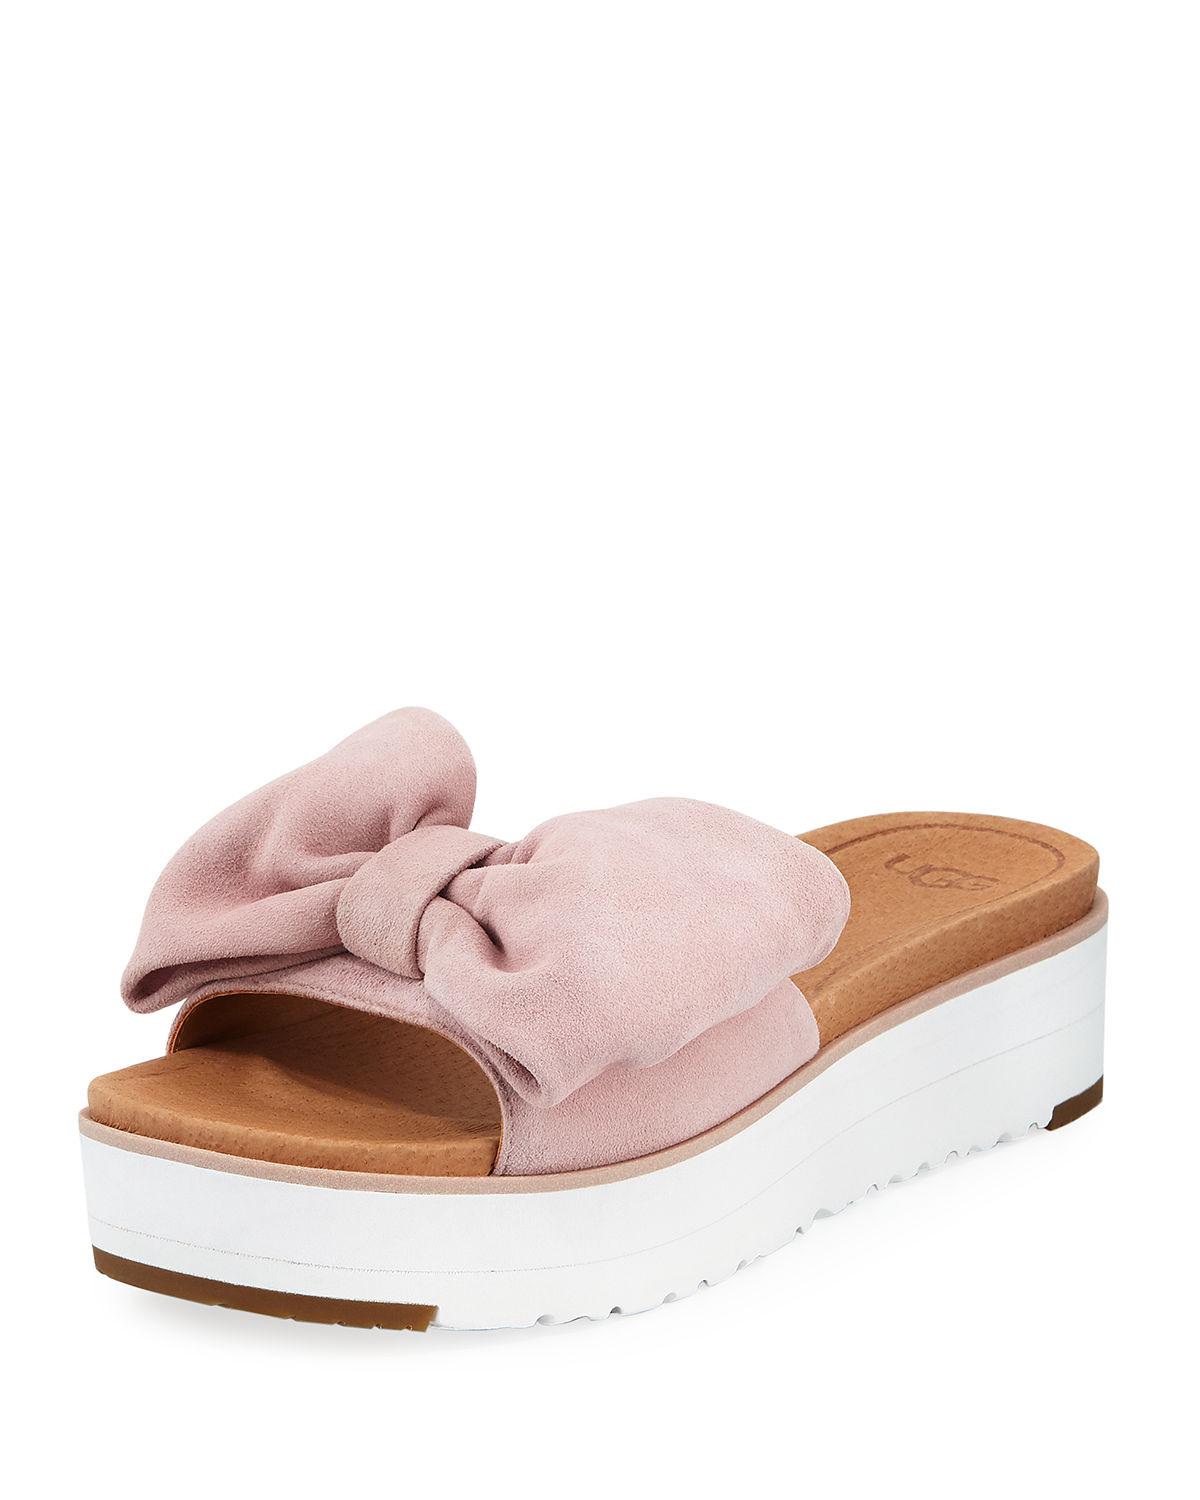 ugg bow sandals 